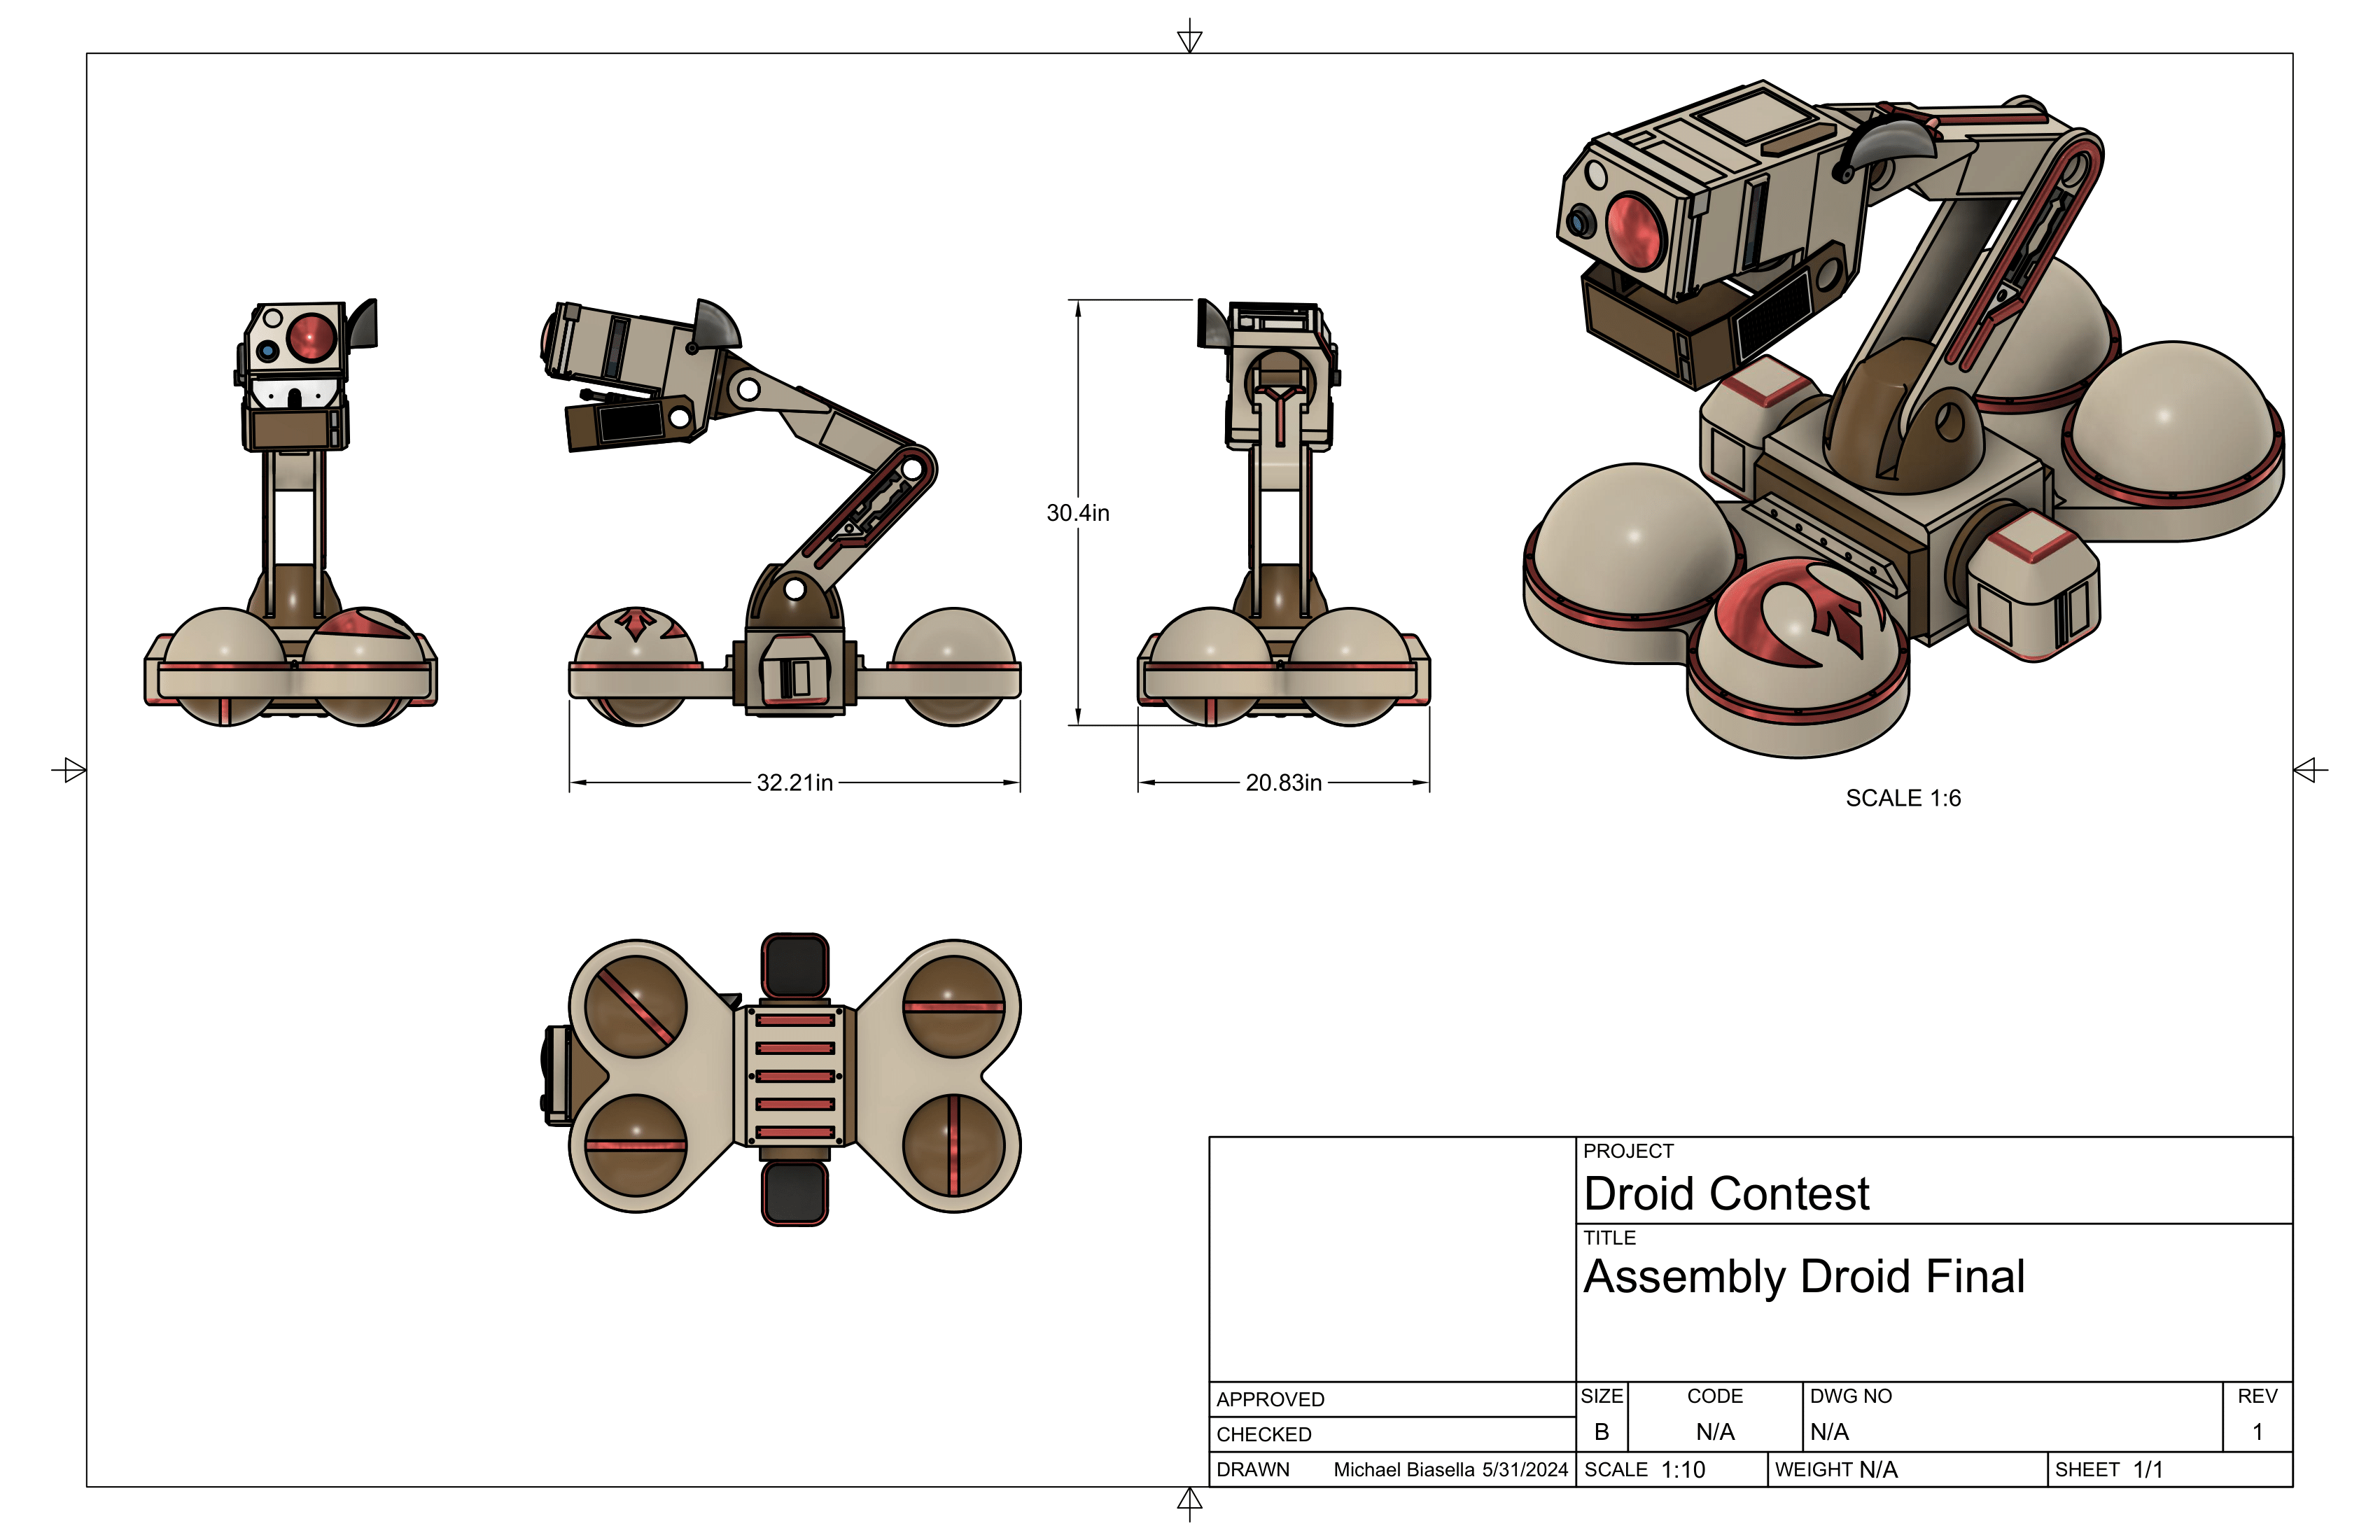 9.1 Assembly Droid Final Drawing v2-1.png